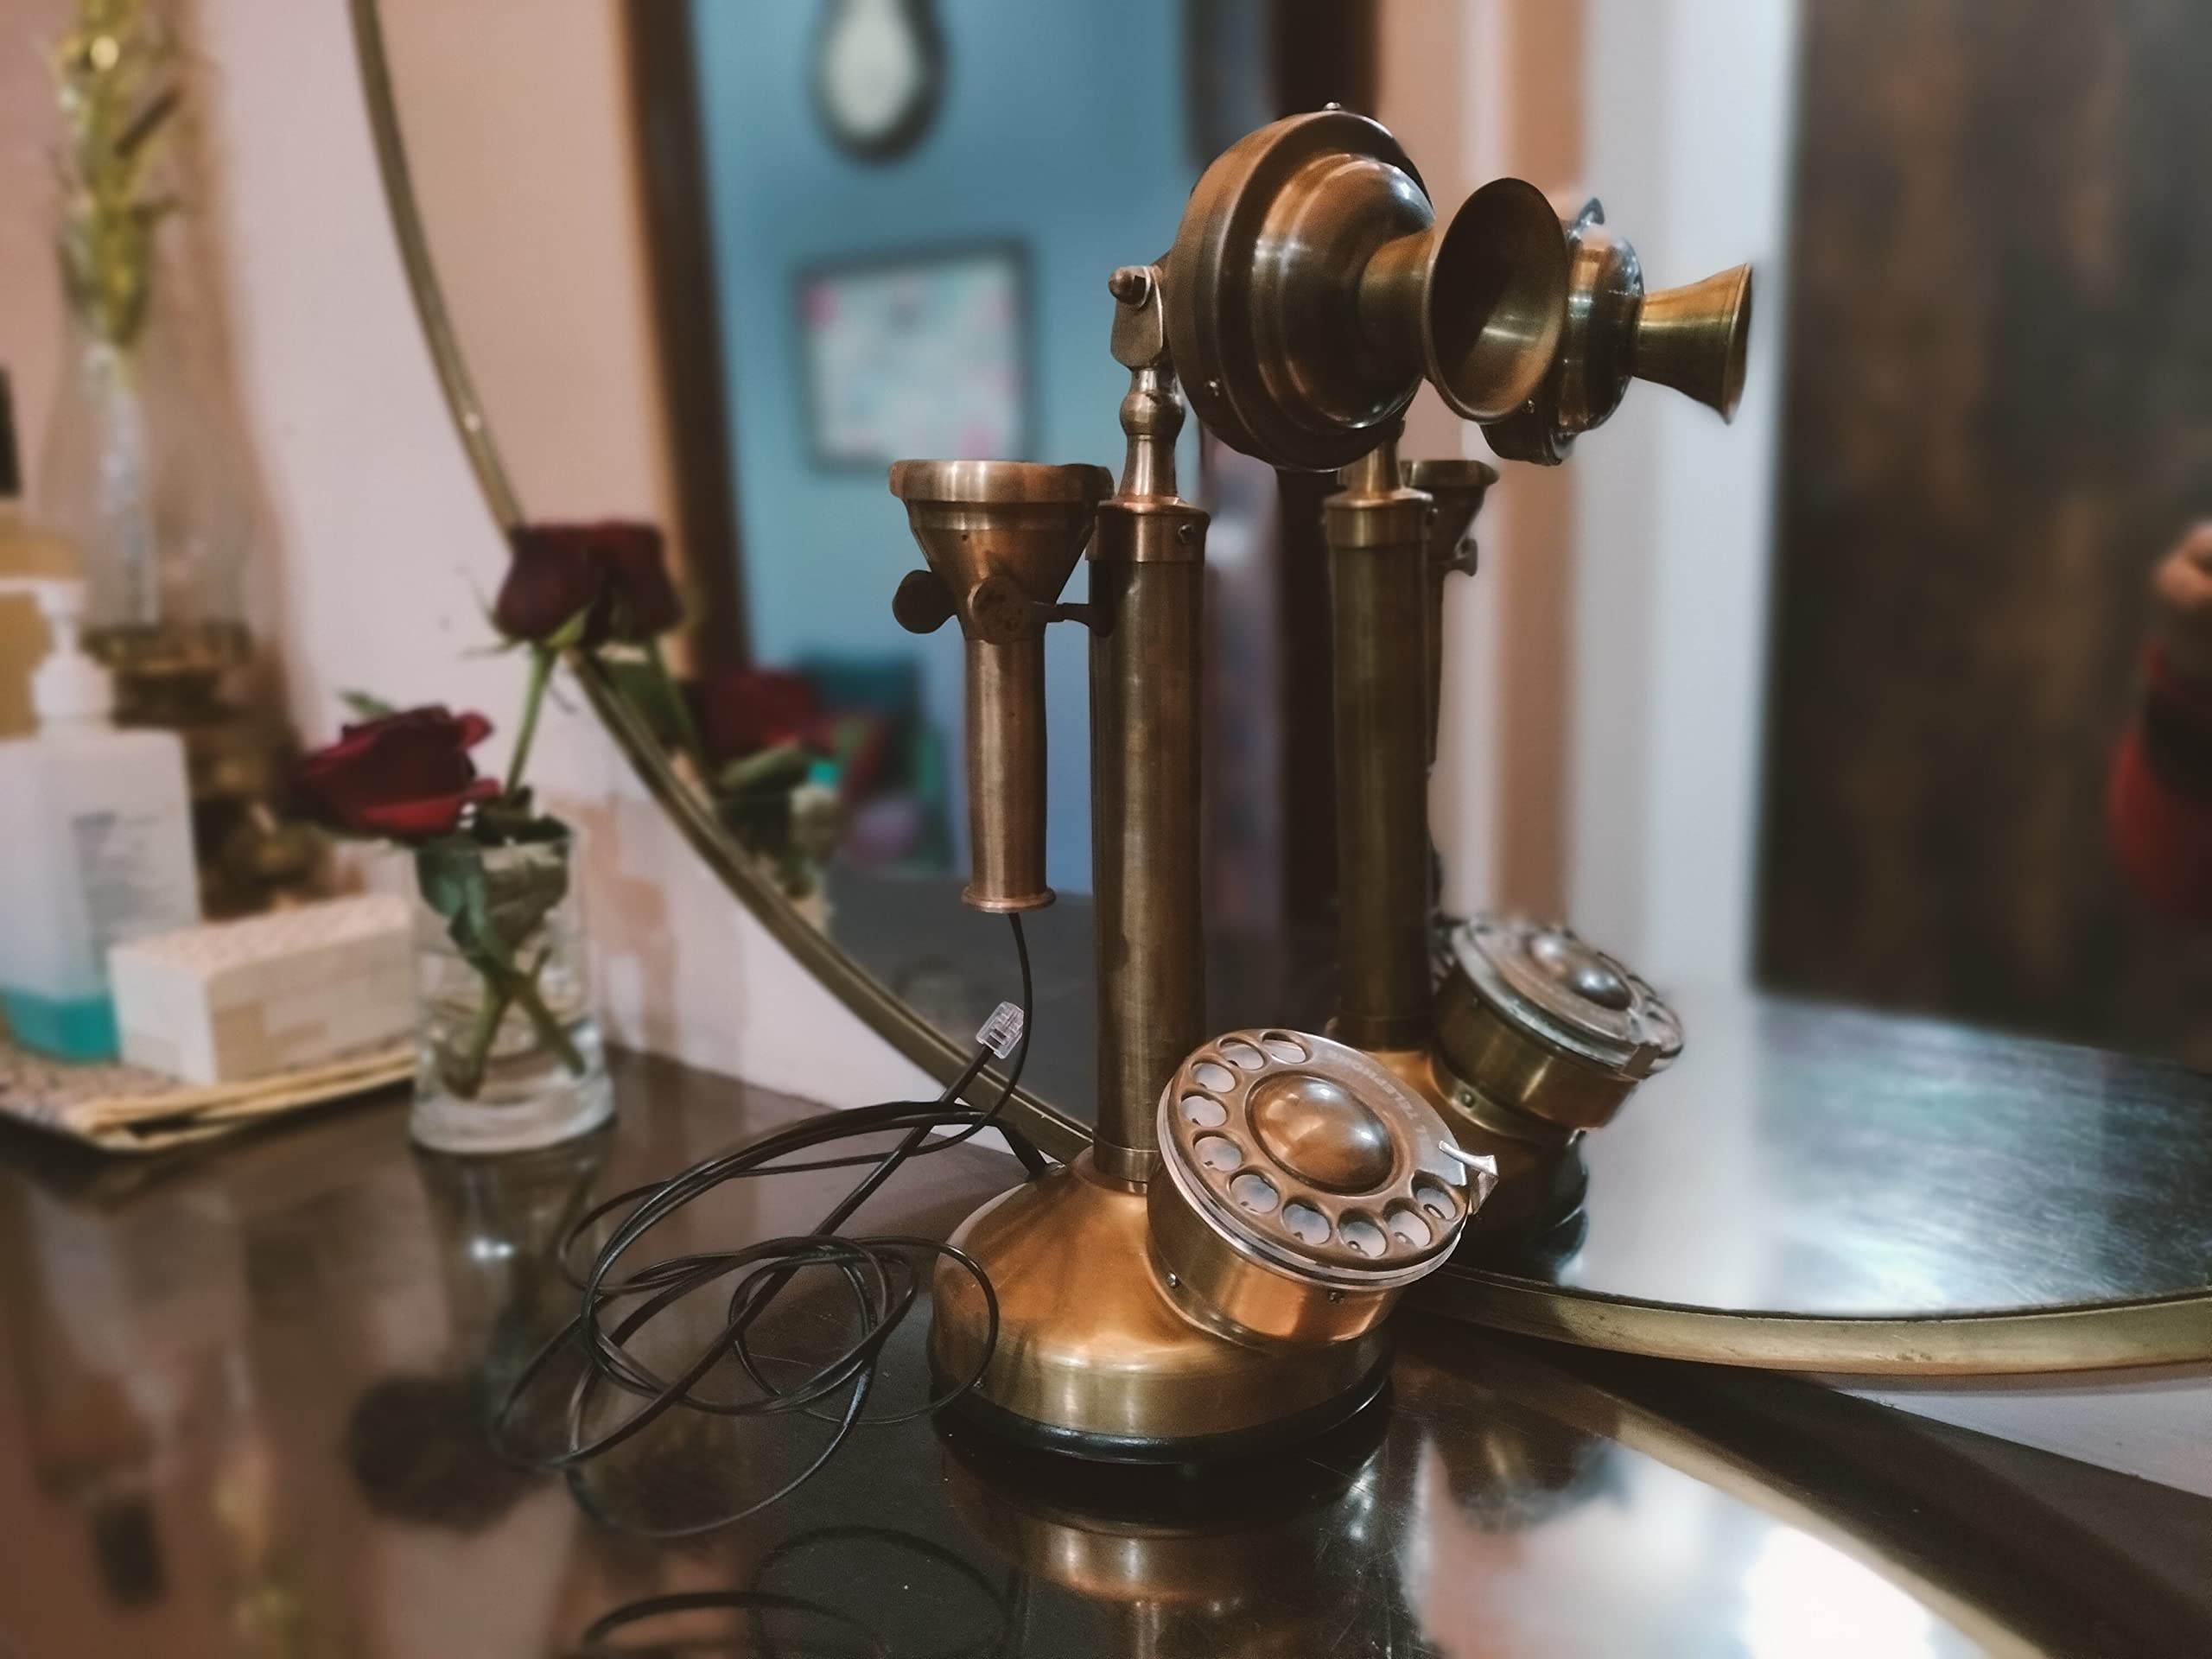 Antique Western Electric Bell Telephone Brass Candlestick Phone Replica Electronic Corded Rotary Dial Phone Home Decor